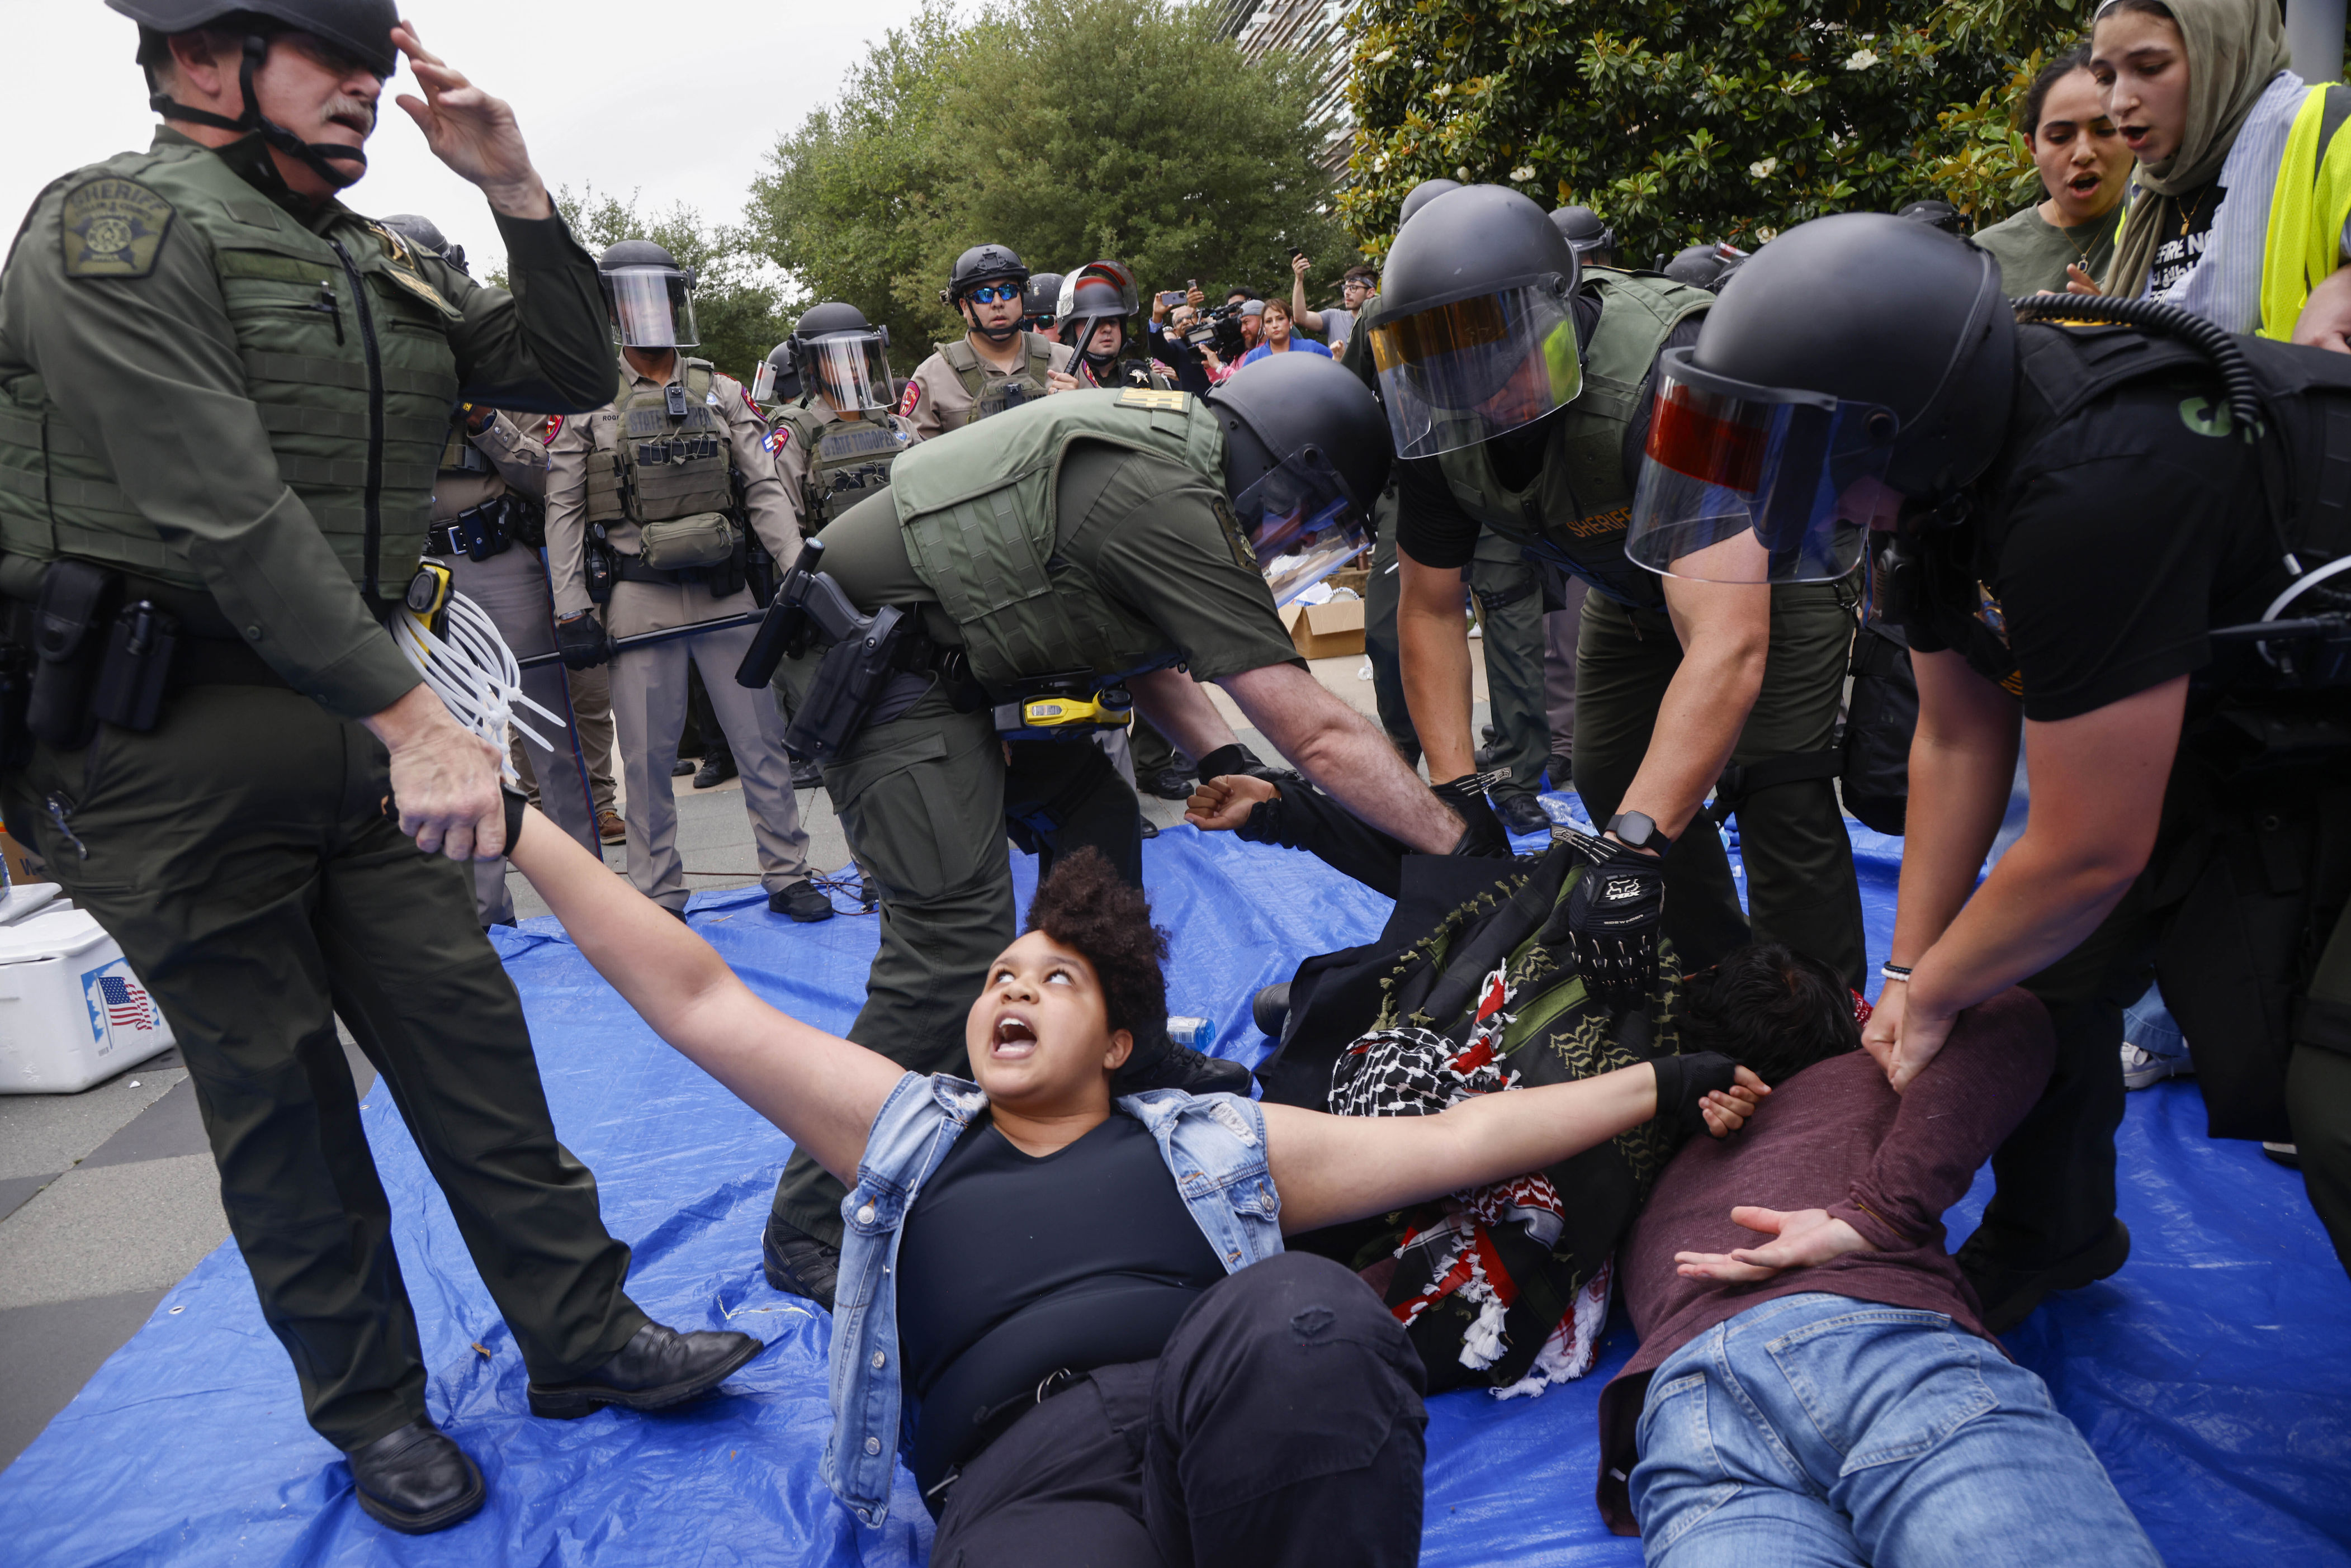 live updates: tensions mounting at ucla; arrests made at fordham as college protests spread